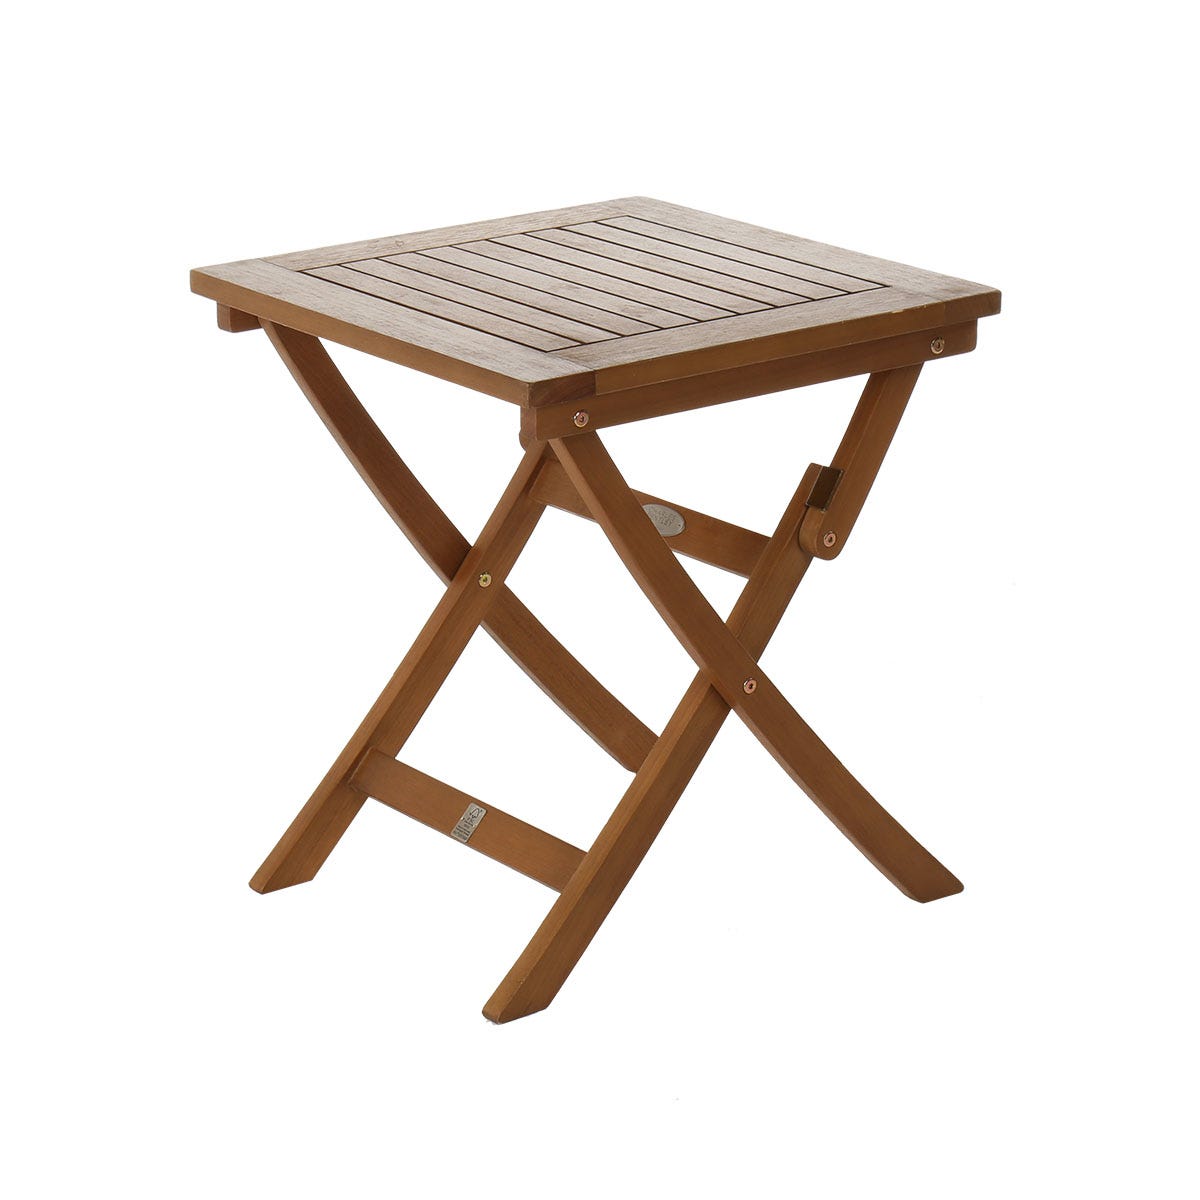 Charles Bentley Fsc Eucalyptus Wooden Small Folding Side Table